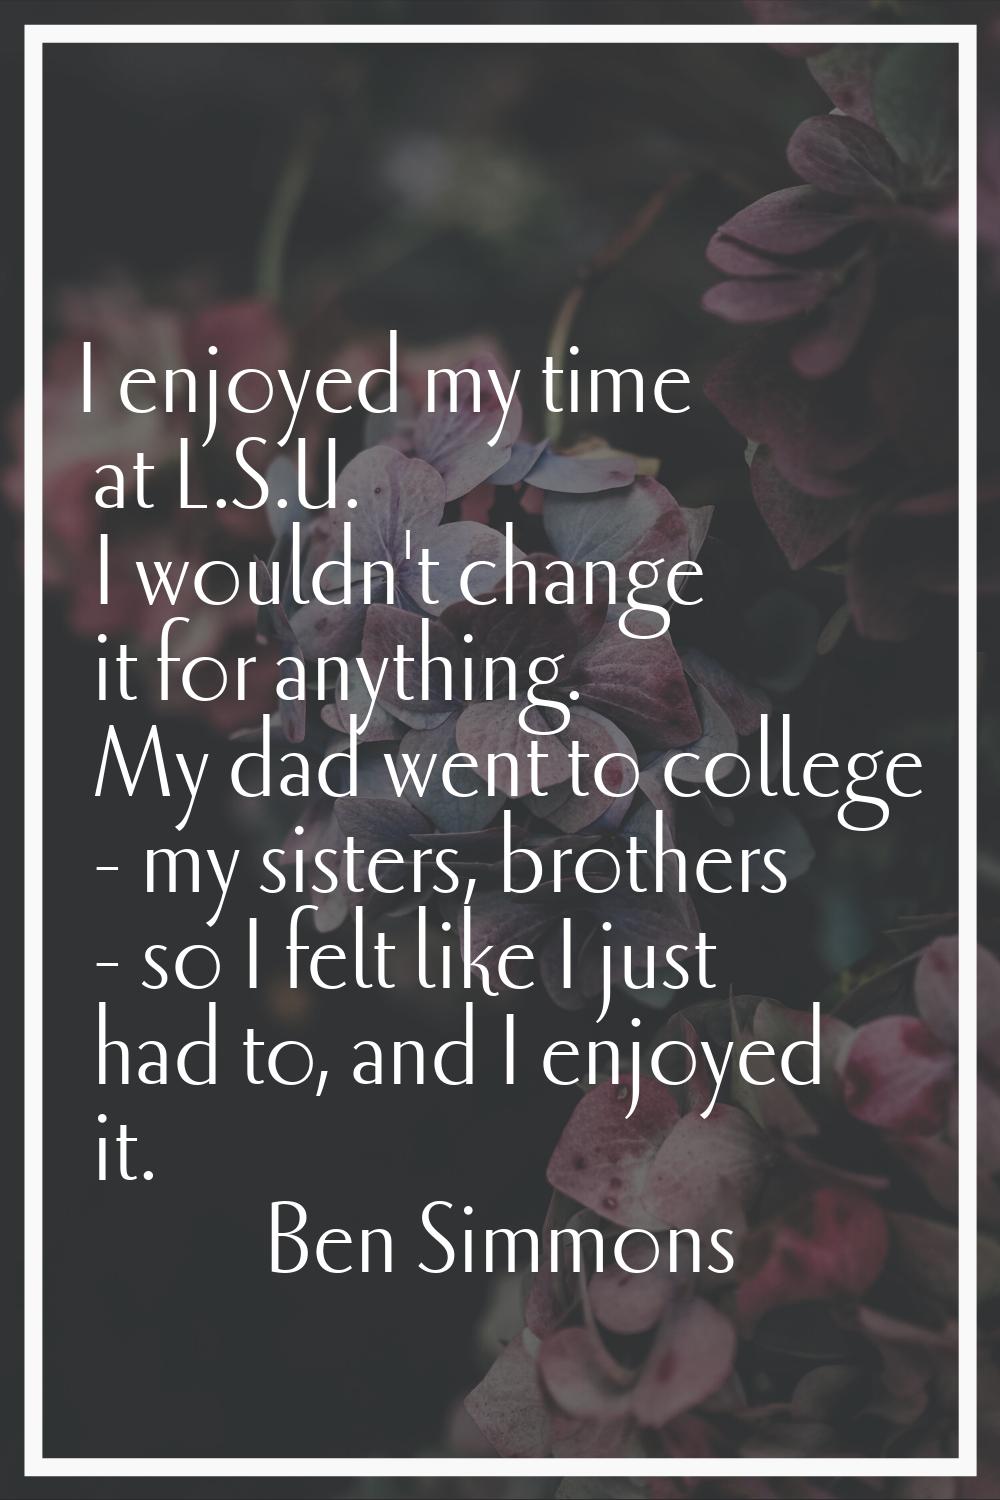 I enjoyed my time at L.S.U. I wouldn't change it for anything. My dad went to college - my sisters,